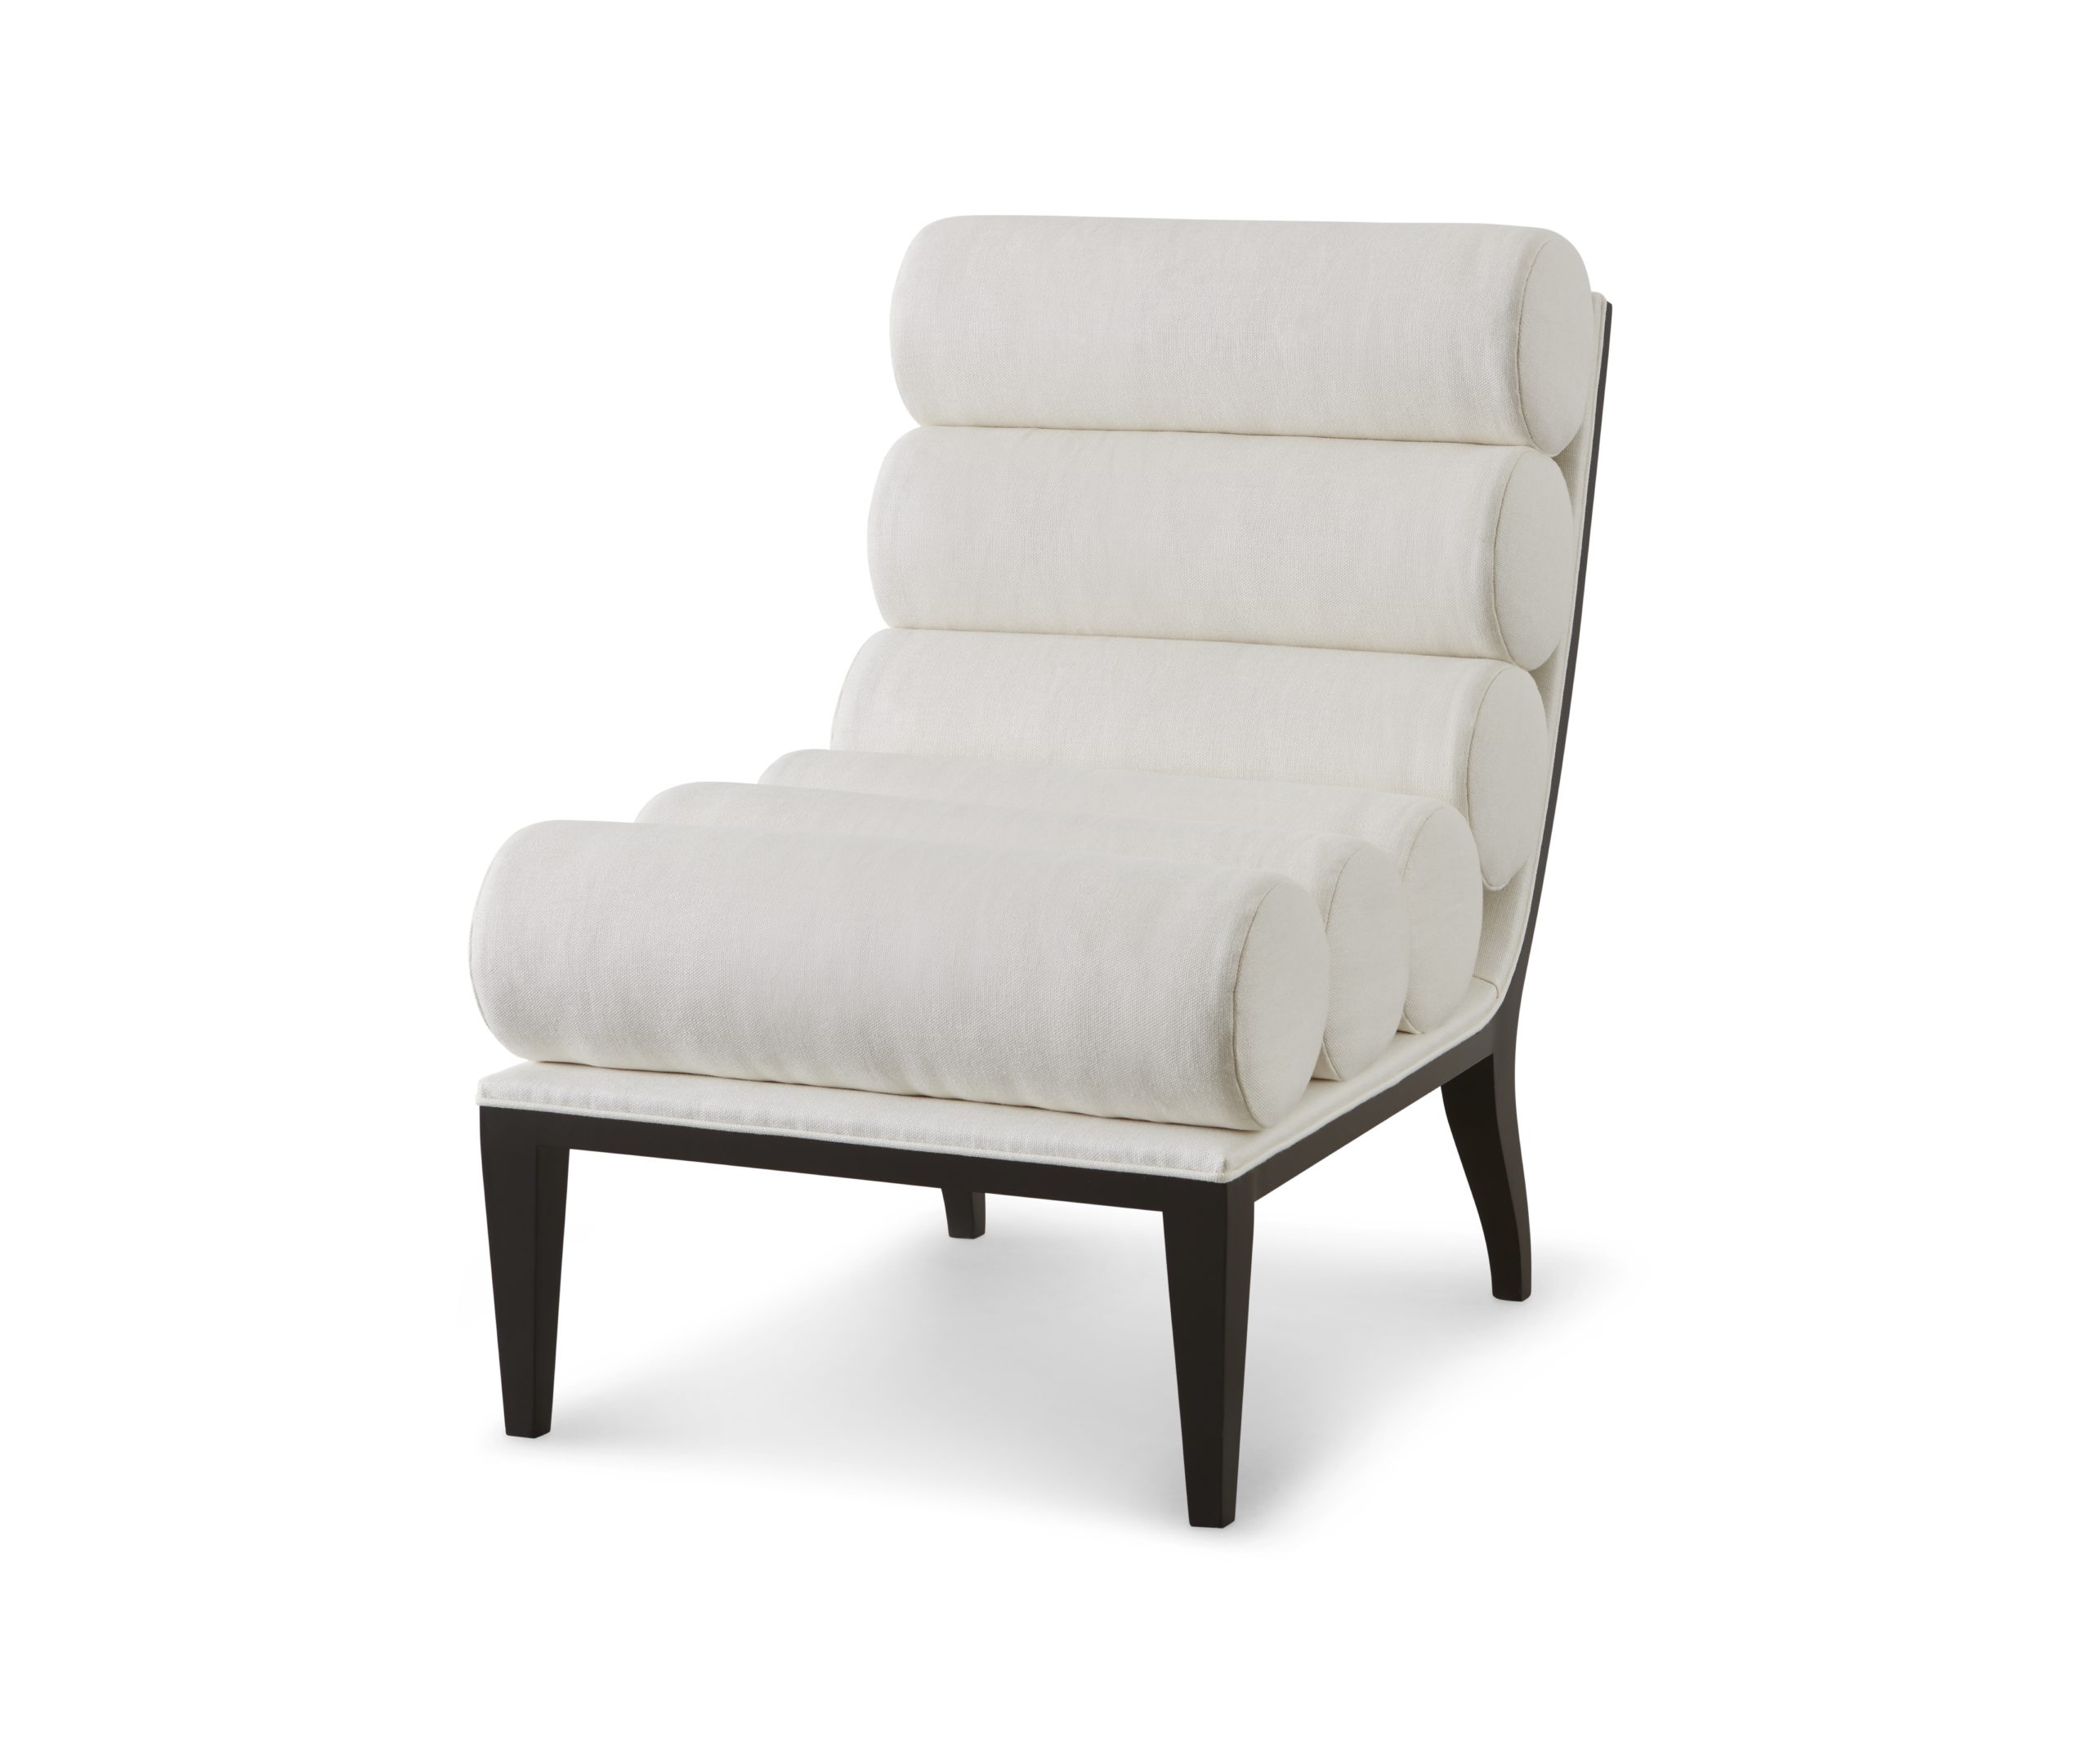 Baker_products_WNWN_arlo_lounge_chair_BAU3308c_FRONT_3QRT-2-scaled-1